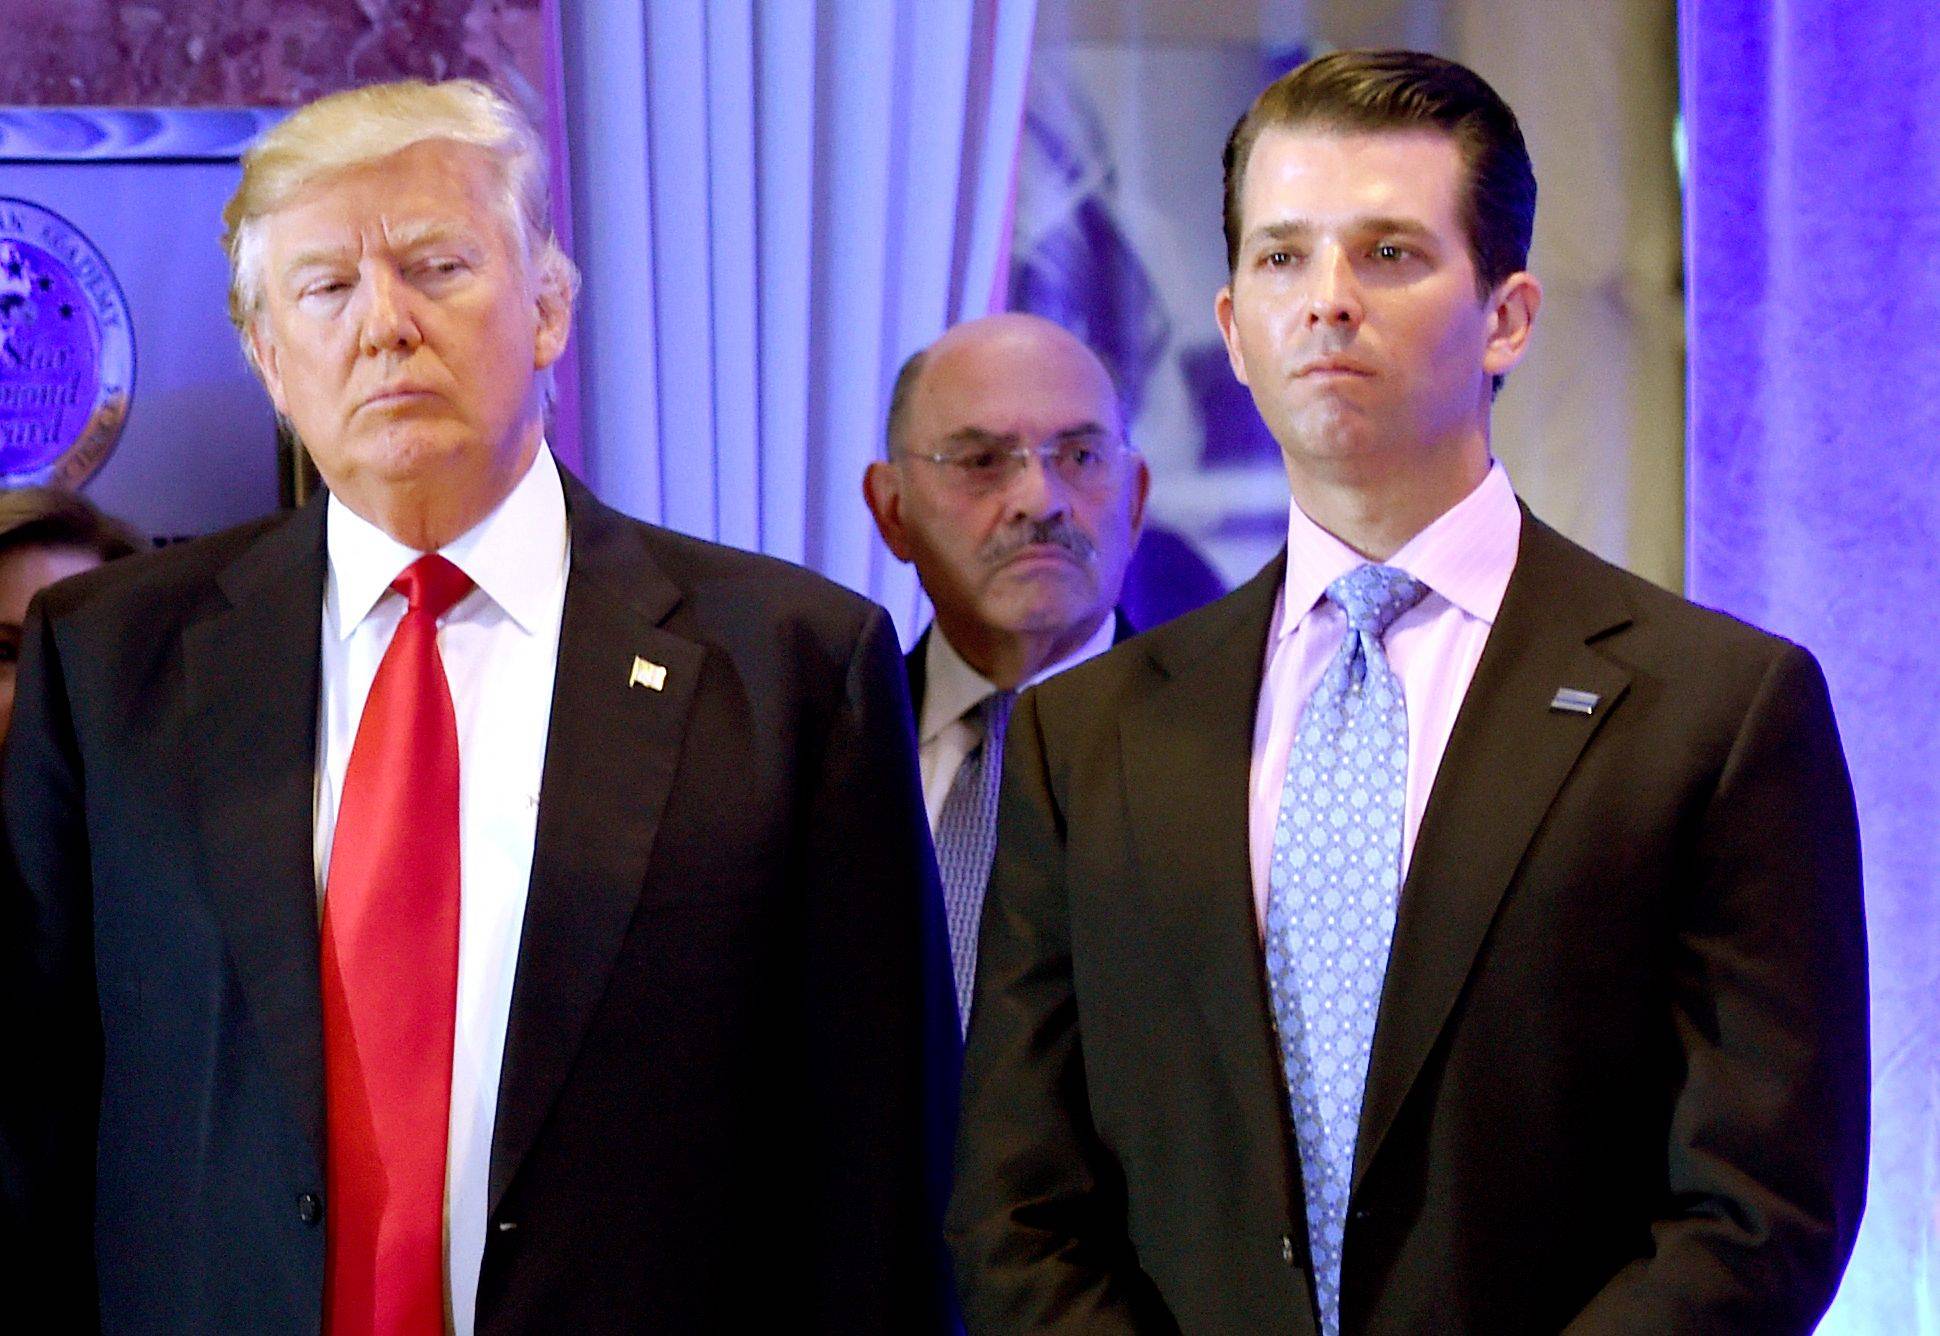 Trump company indictment: Only the start